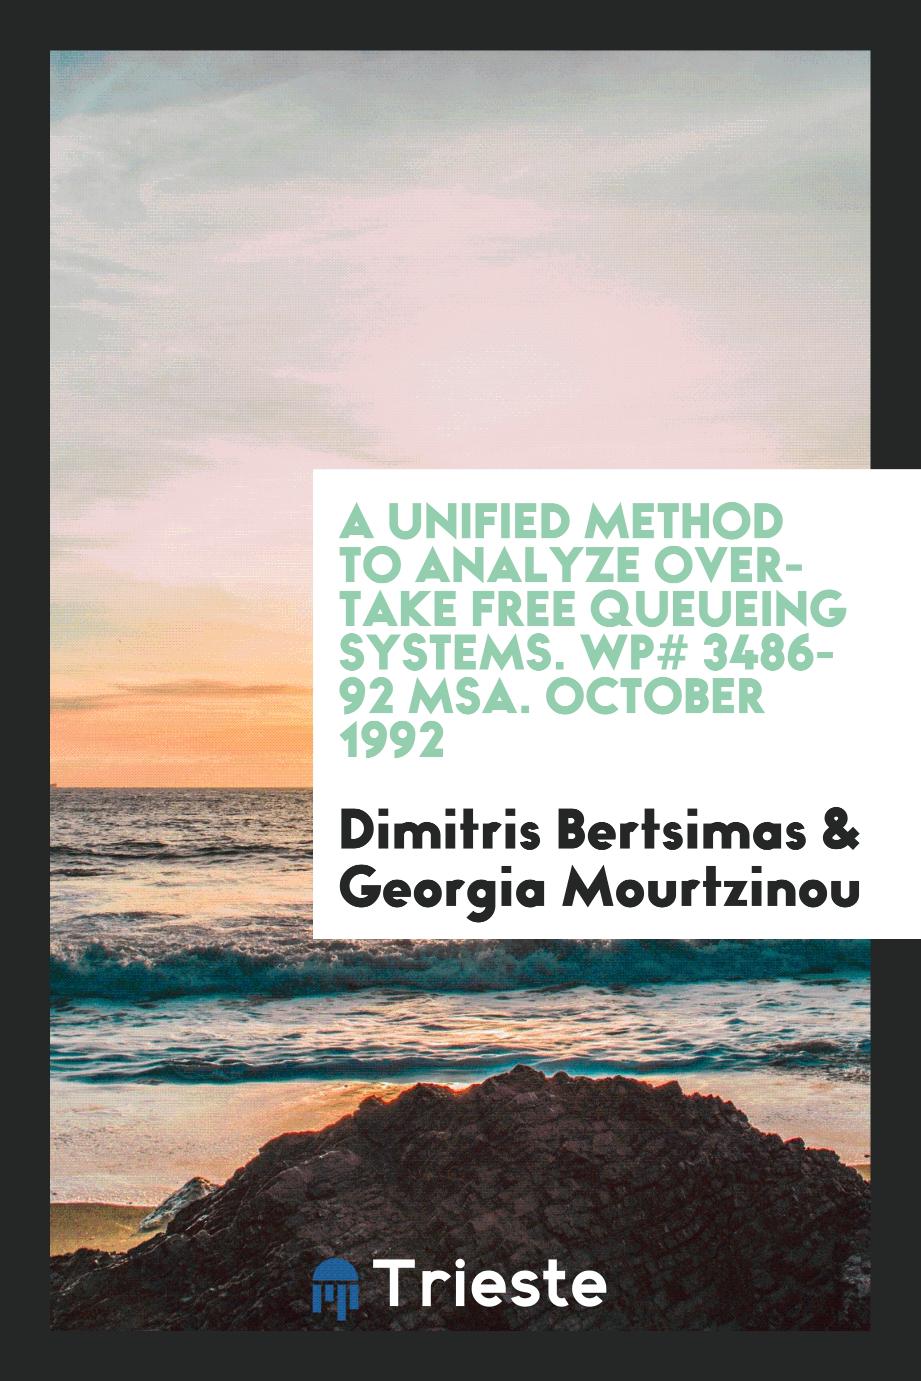 A unified method to analyze overtake free queueing systems. WP# 3486-92 MSA. October 1992